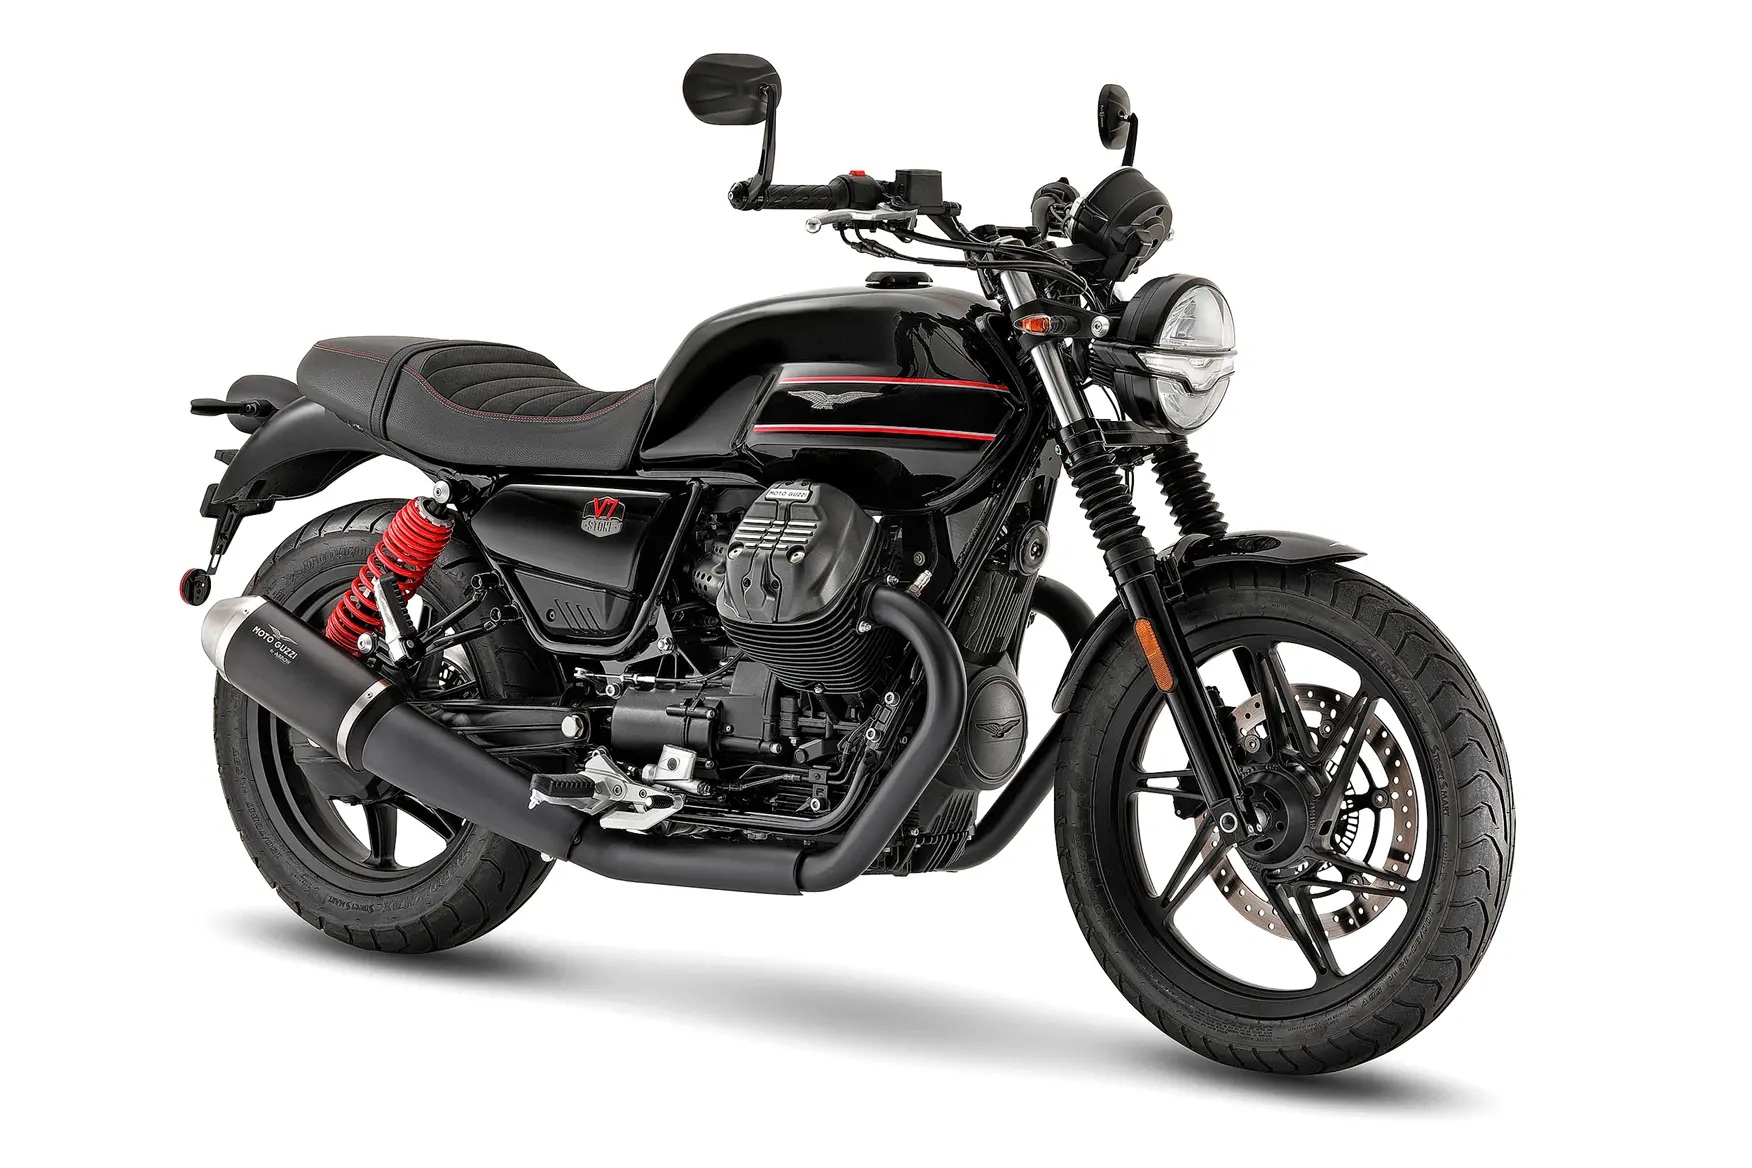 Moto Guzzi's V7 Stone Special Edition. media sourced from MCN.